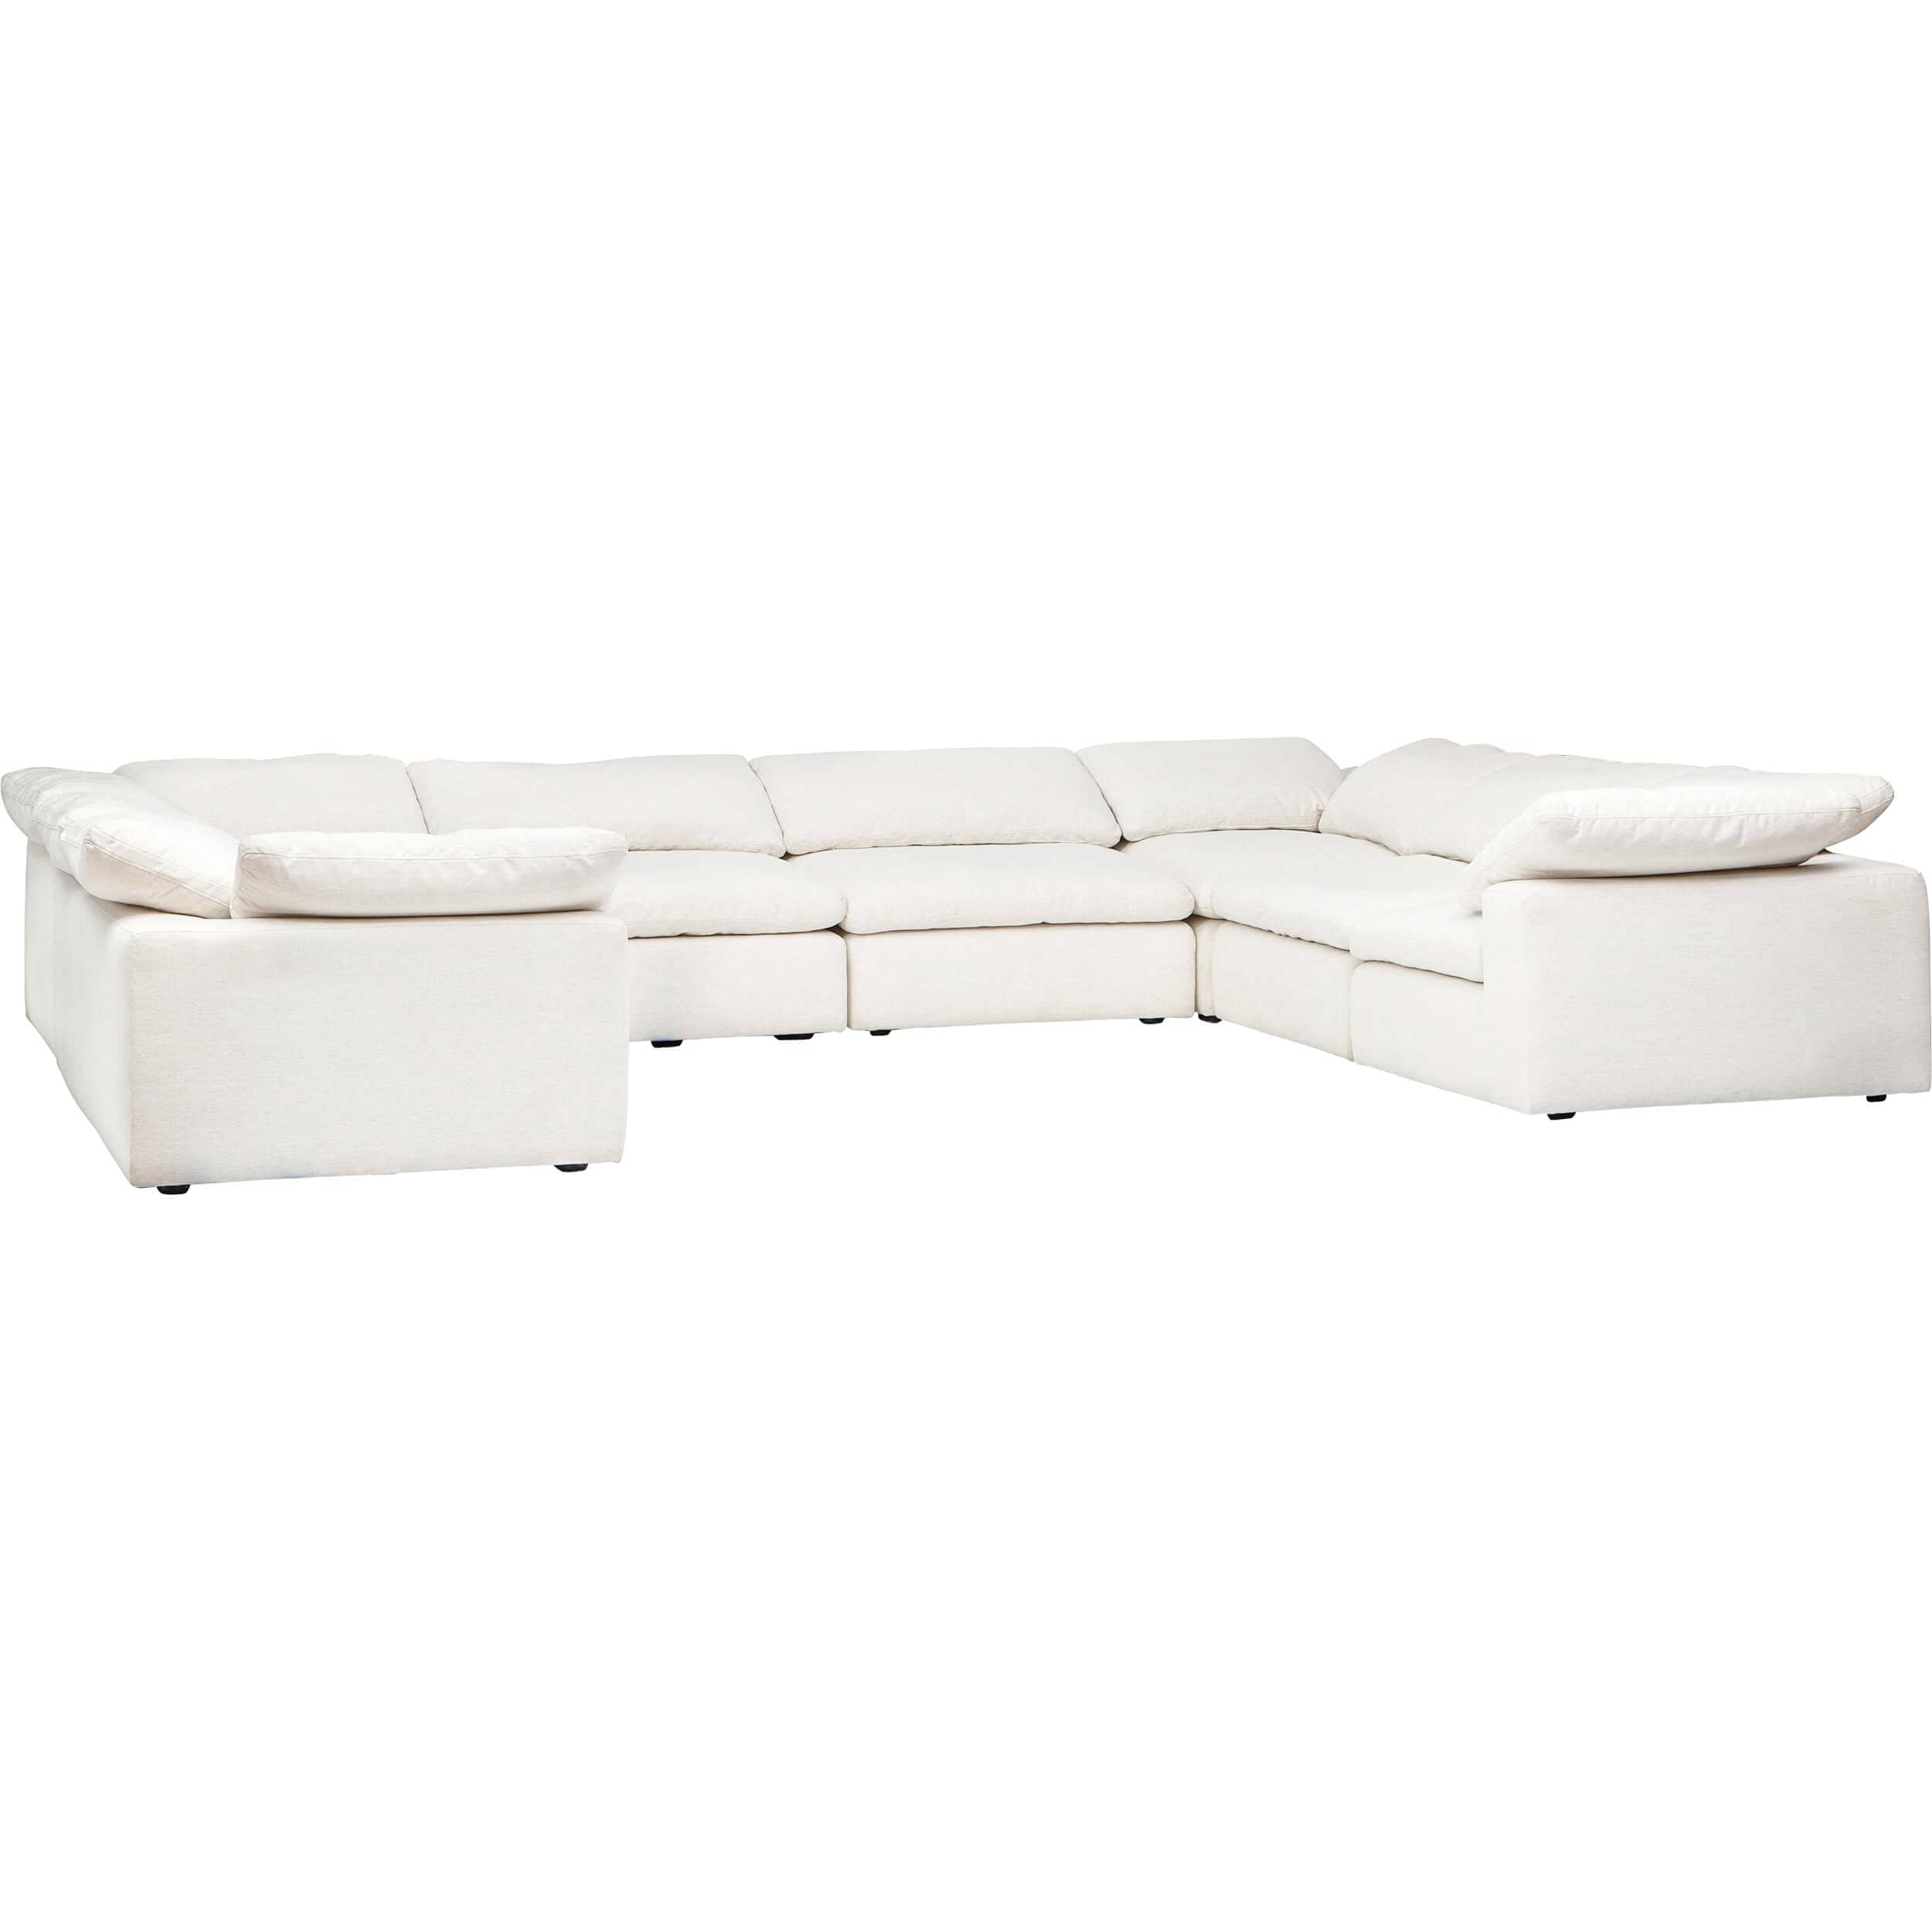 Image of Mateo 8 Piece Modular Sectional, Nomad Snow